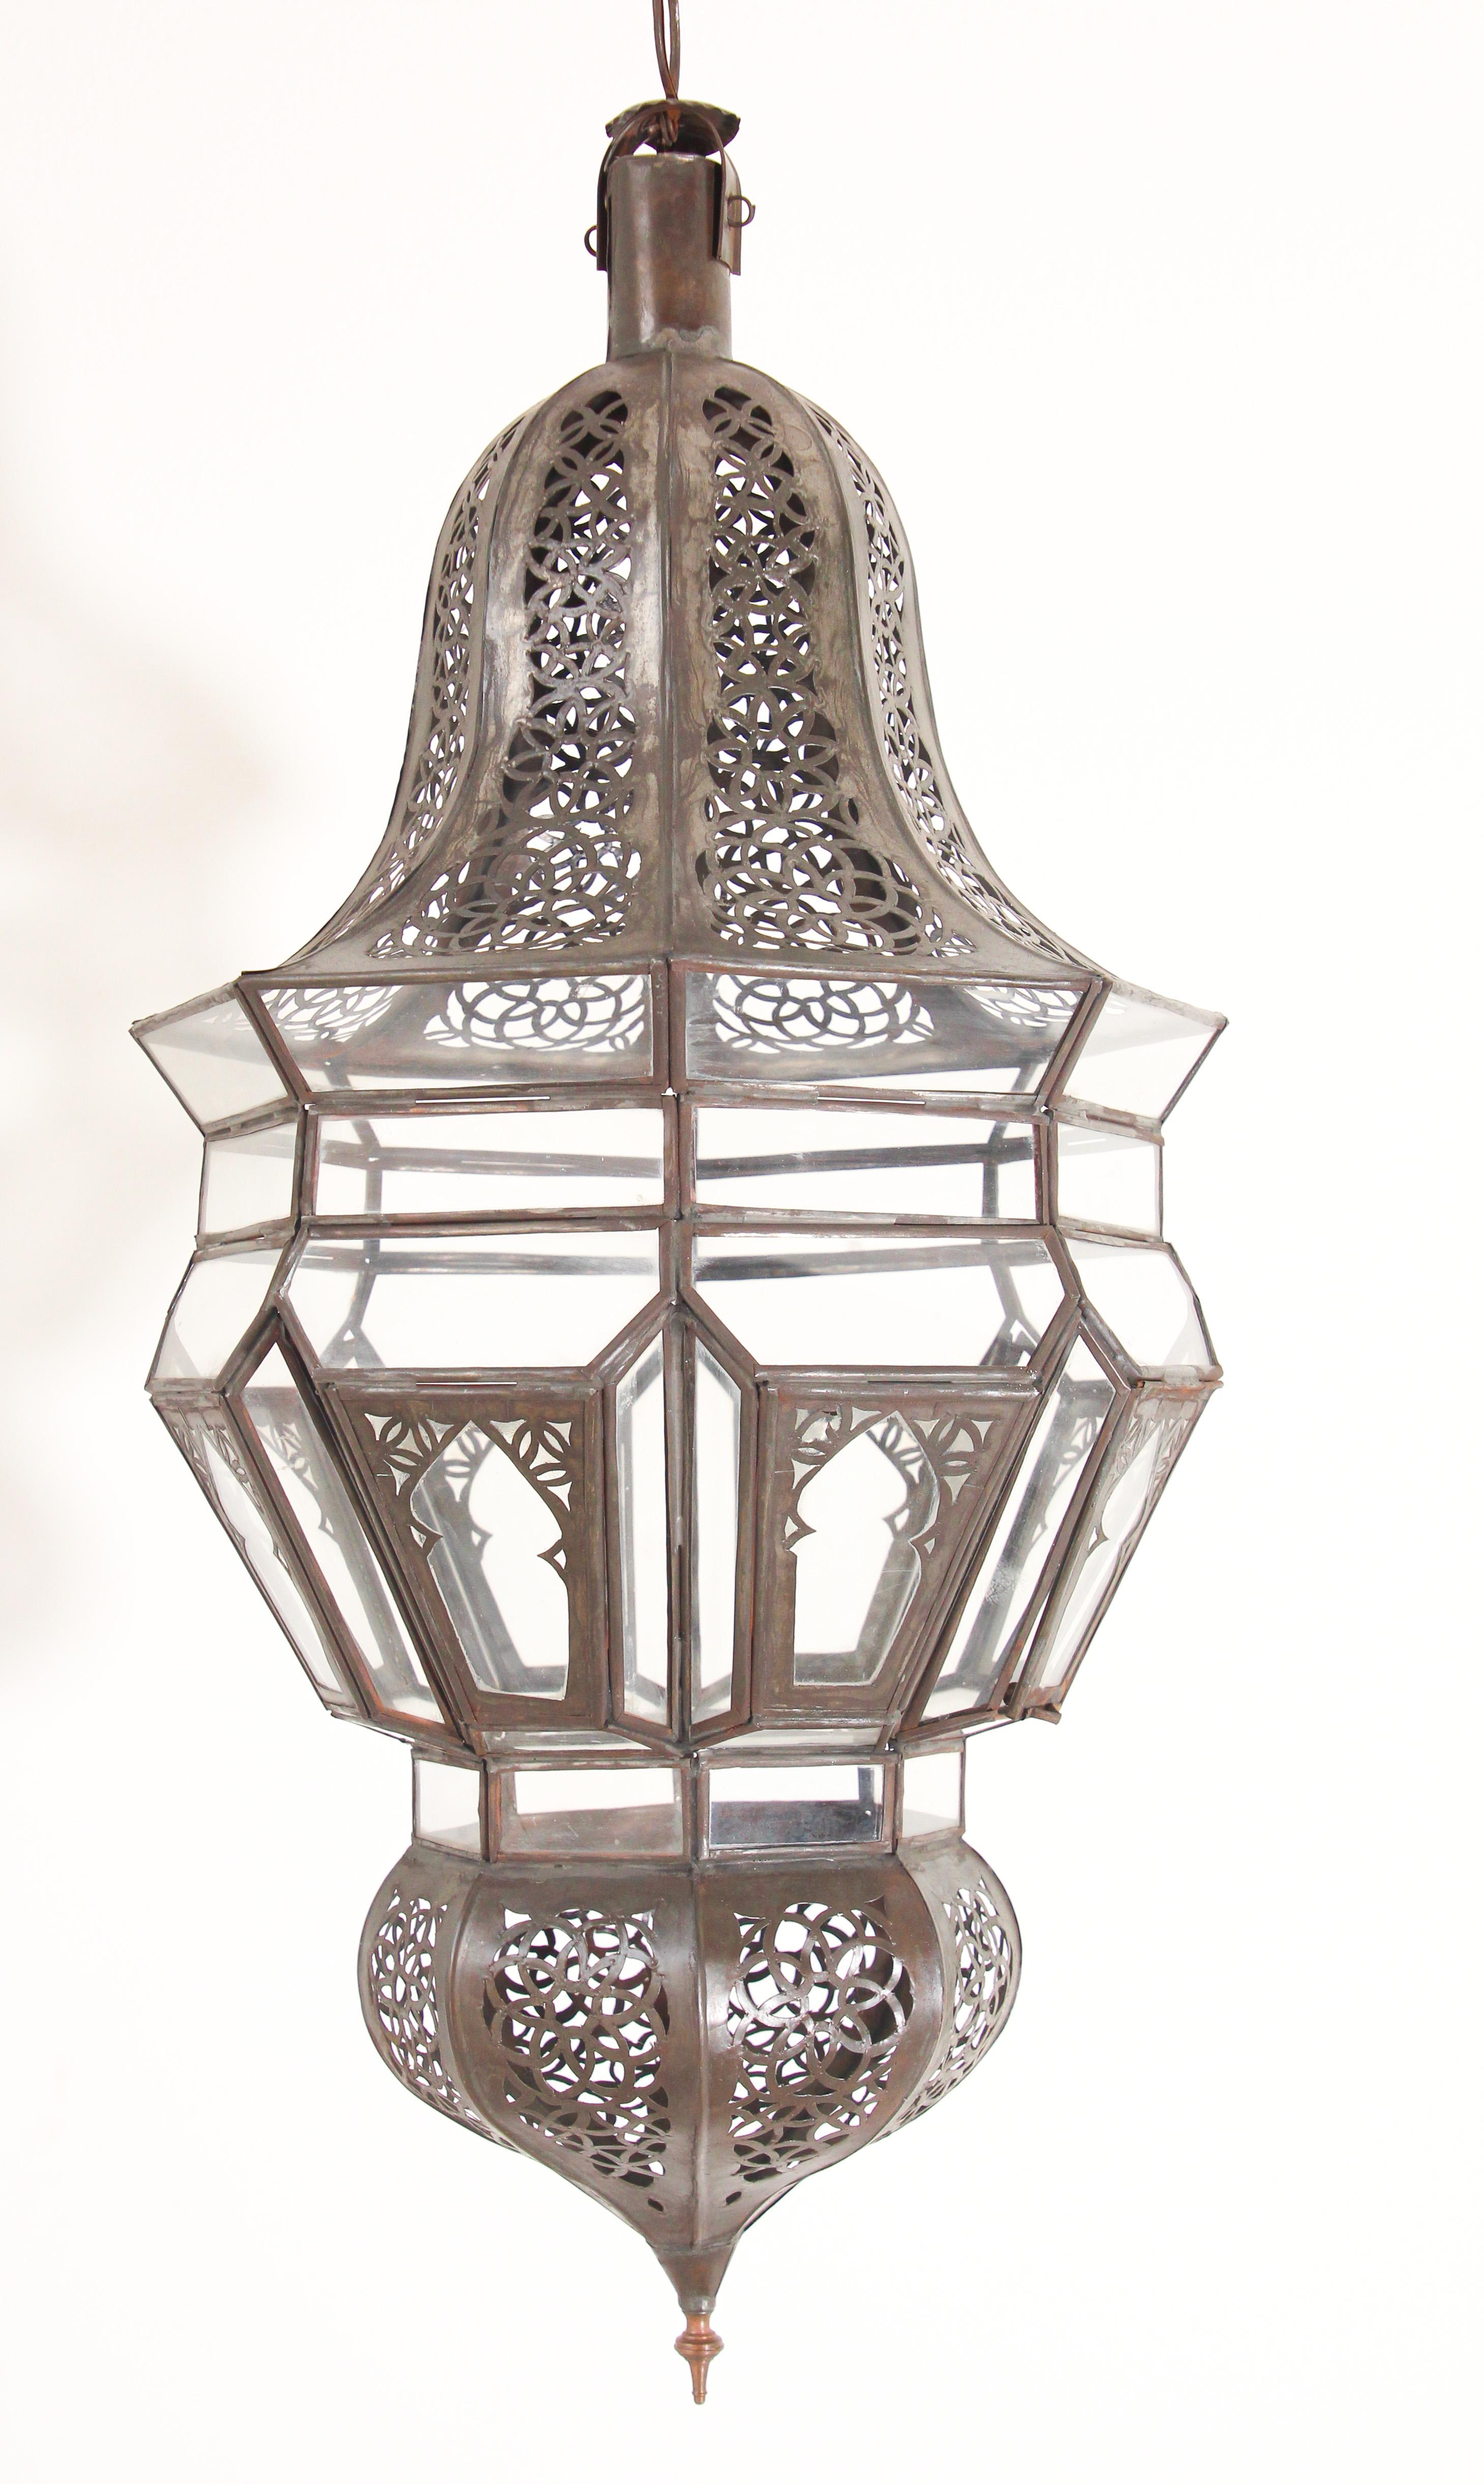 Hand-Crafted Moroccan Hanging Glass Lantern For Sale